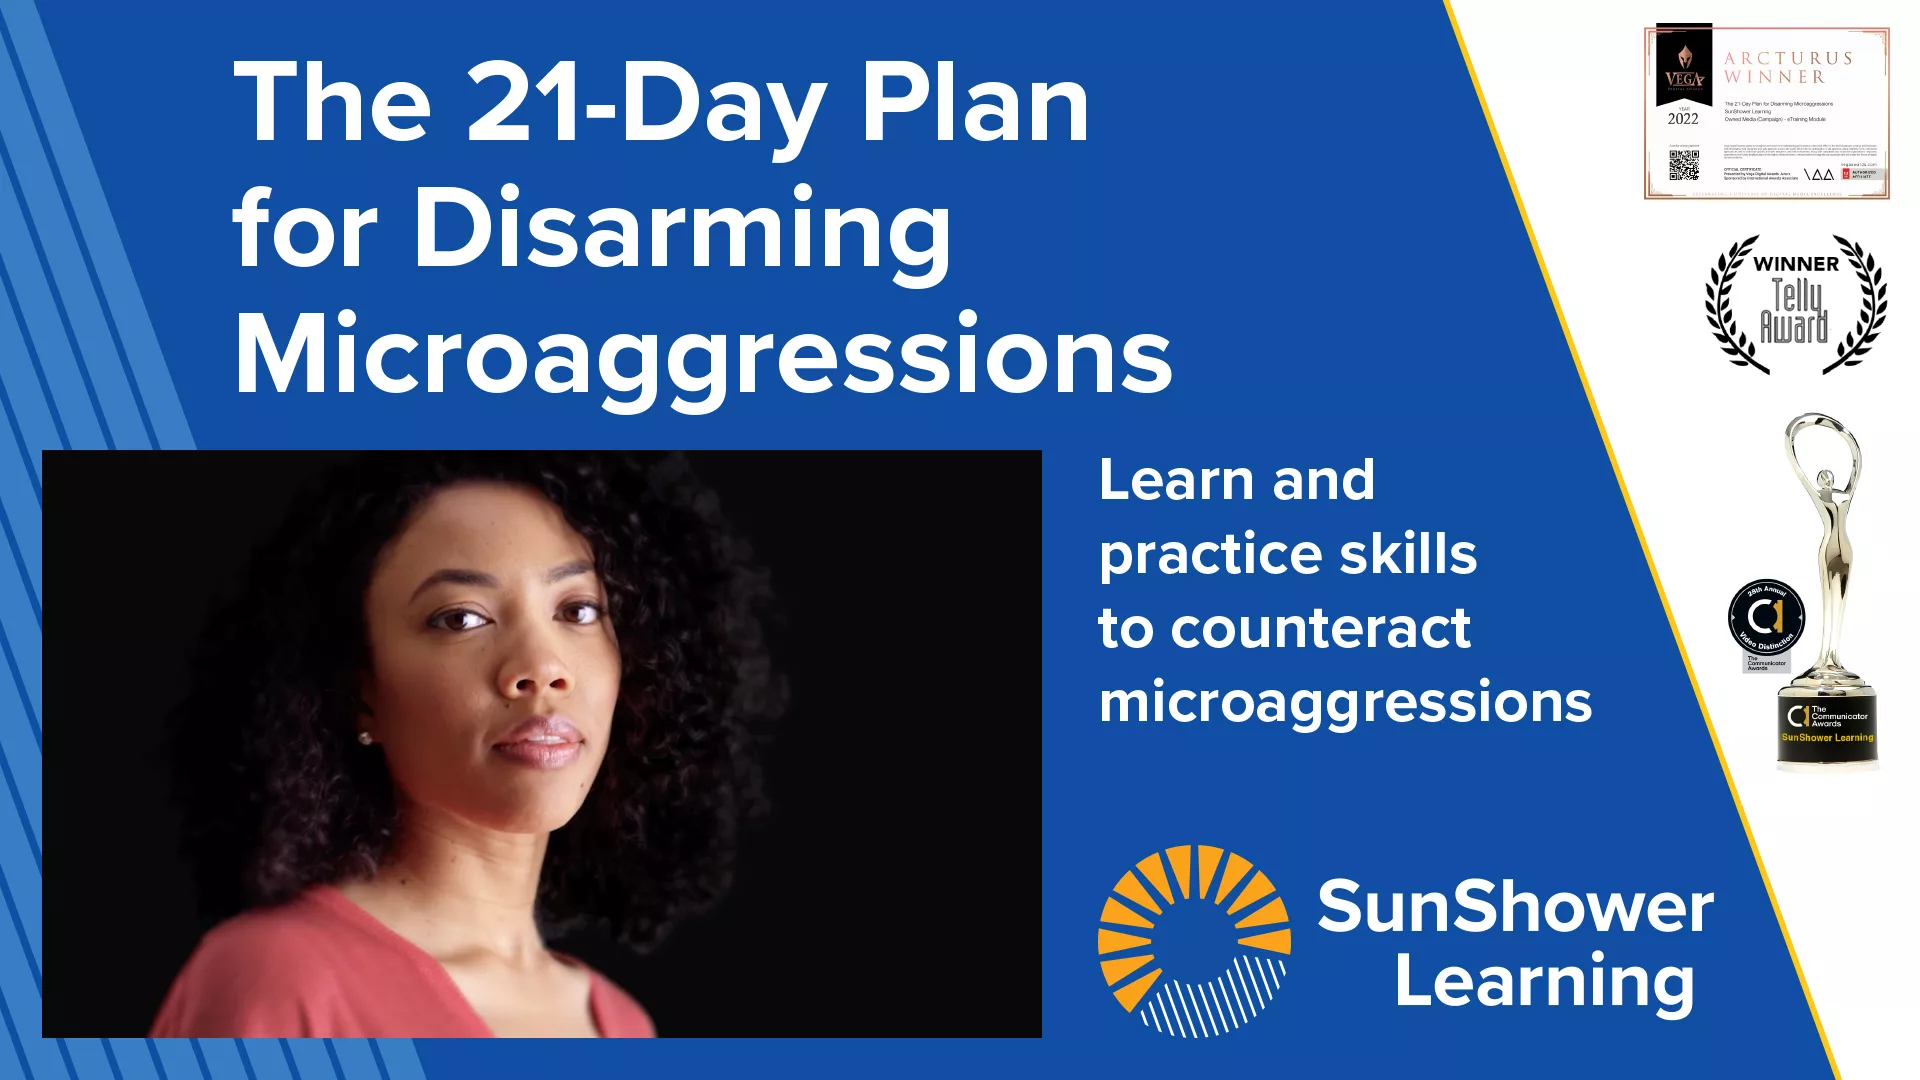 Thumbnail image with title, Inclusion in Action and text: Learn and practice skills to counteract microaggressions. Telly award seal.